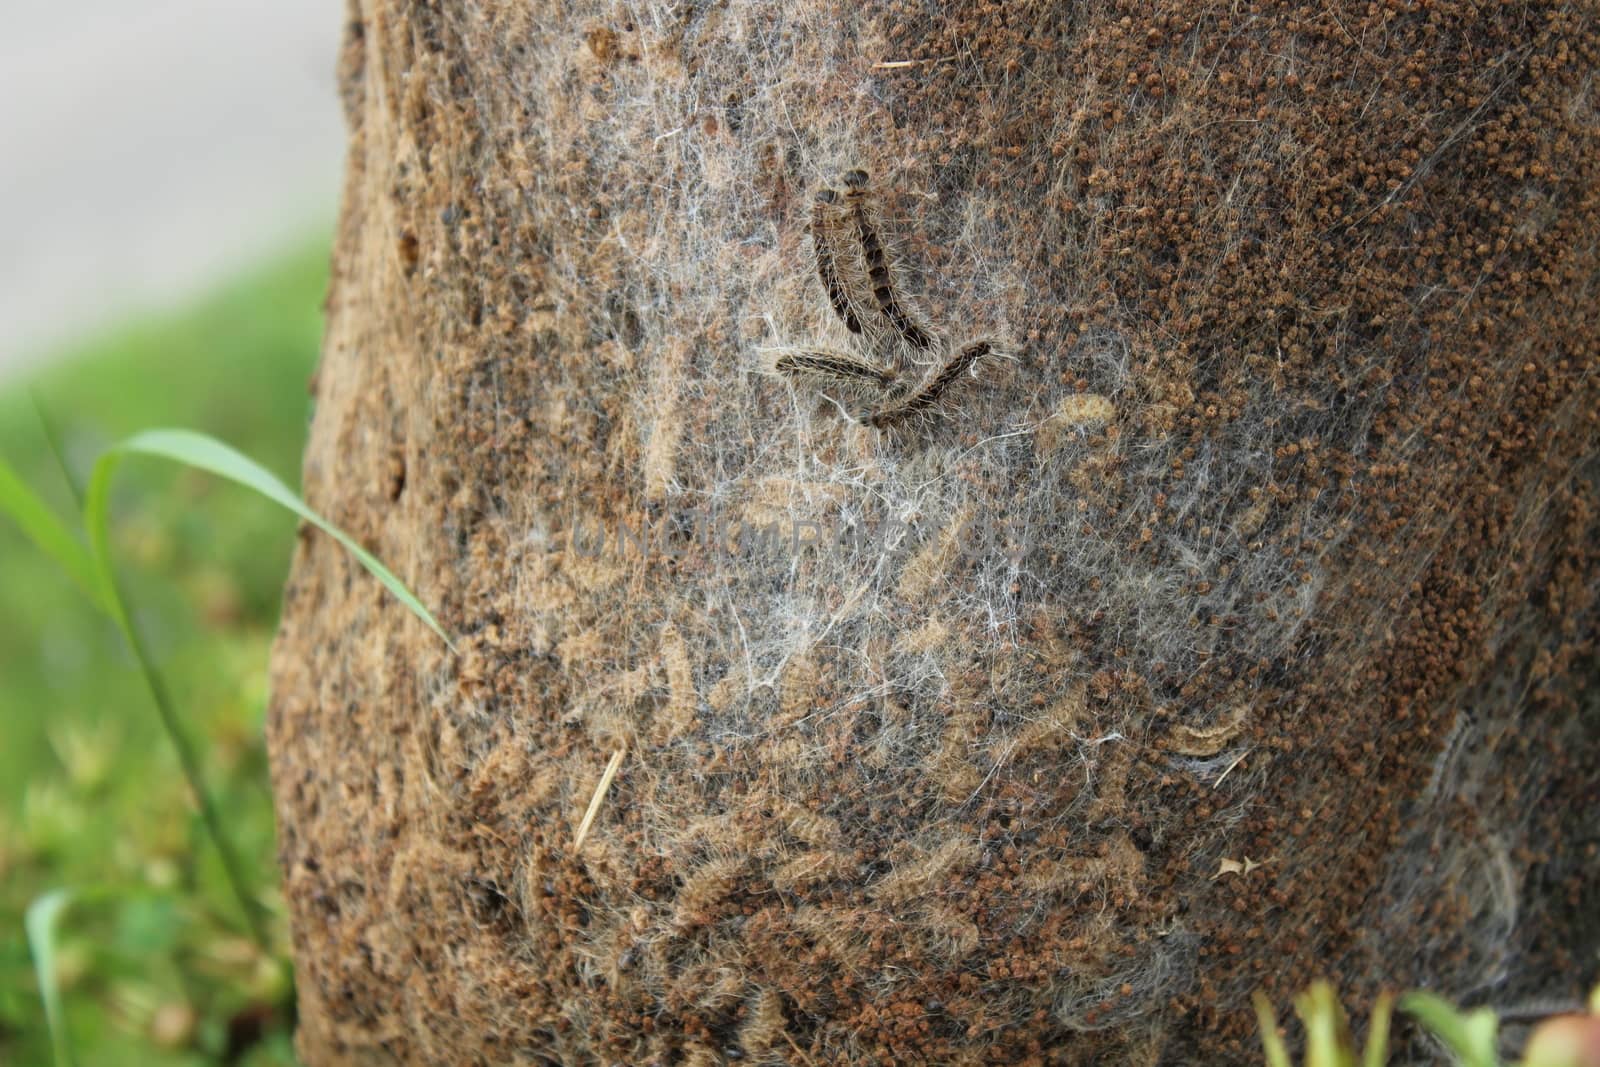 The picture shows an oak processionary moth on a tree